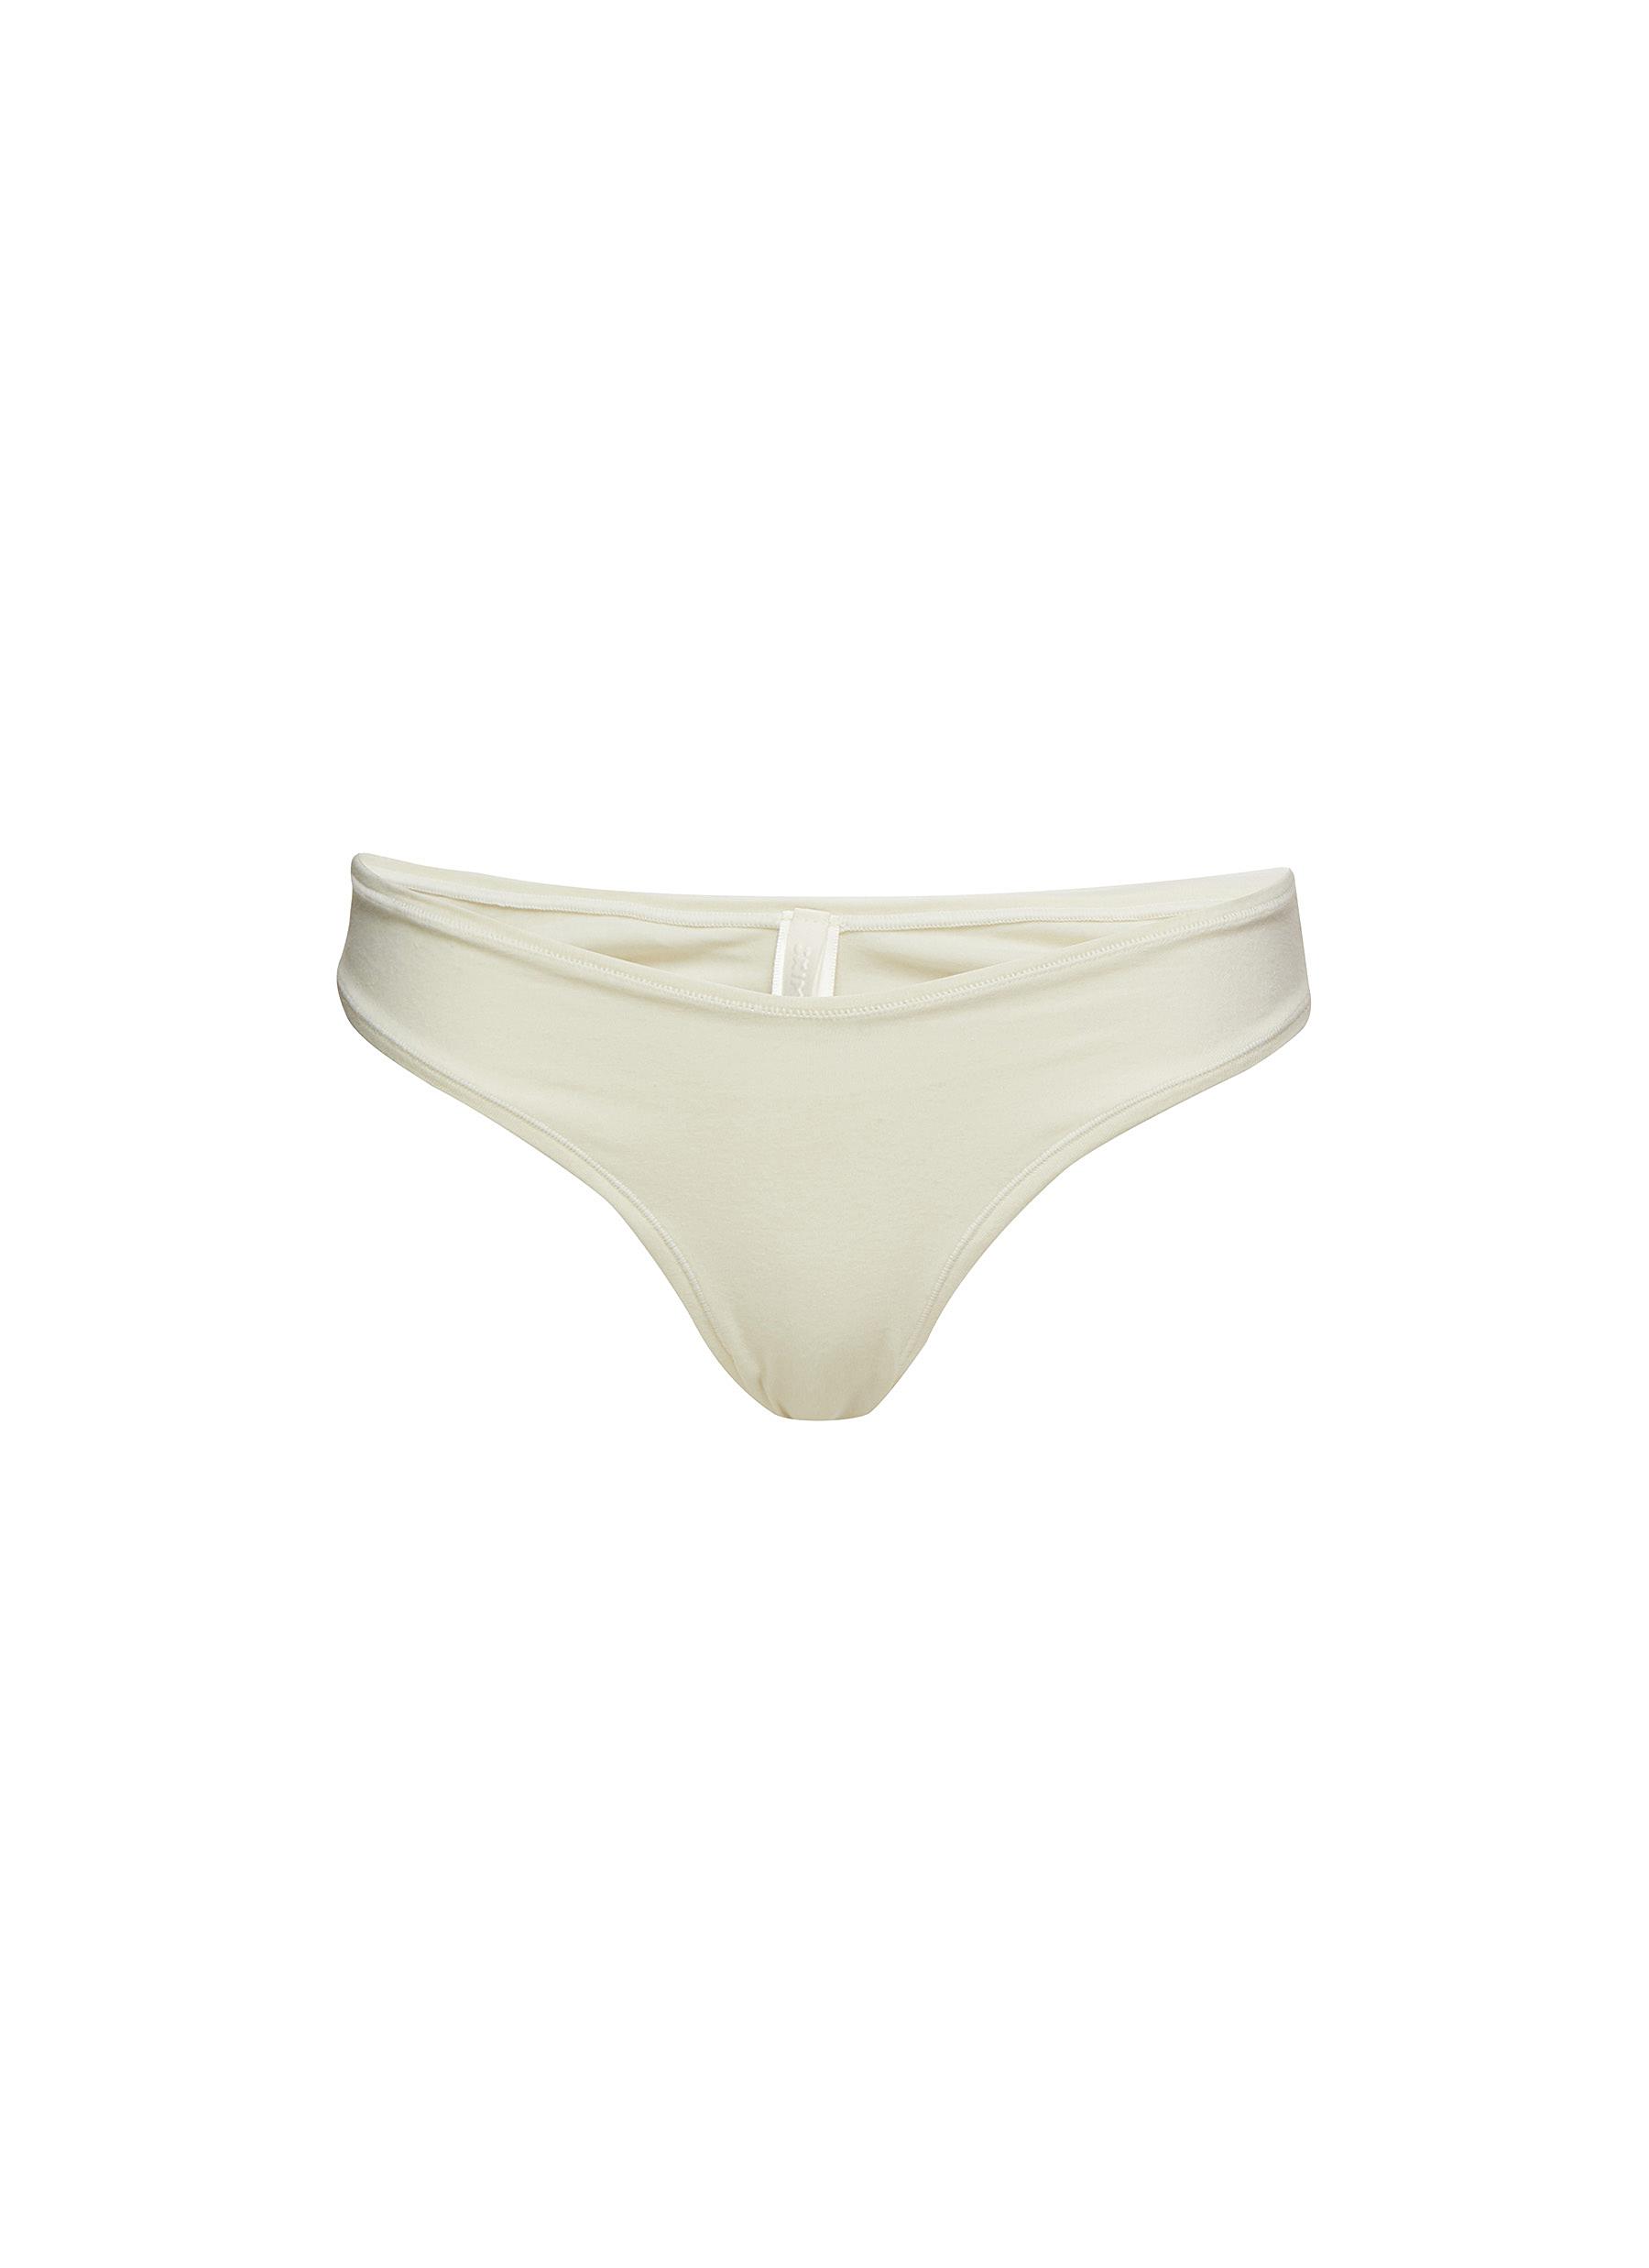 SKIMS Women's Cotton Jersey Dipped Thong Bone Size Large Style PN-DTH-0271  NWT